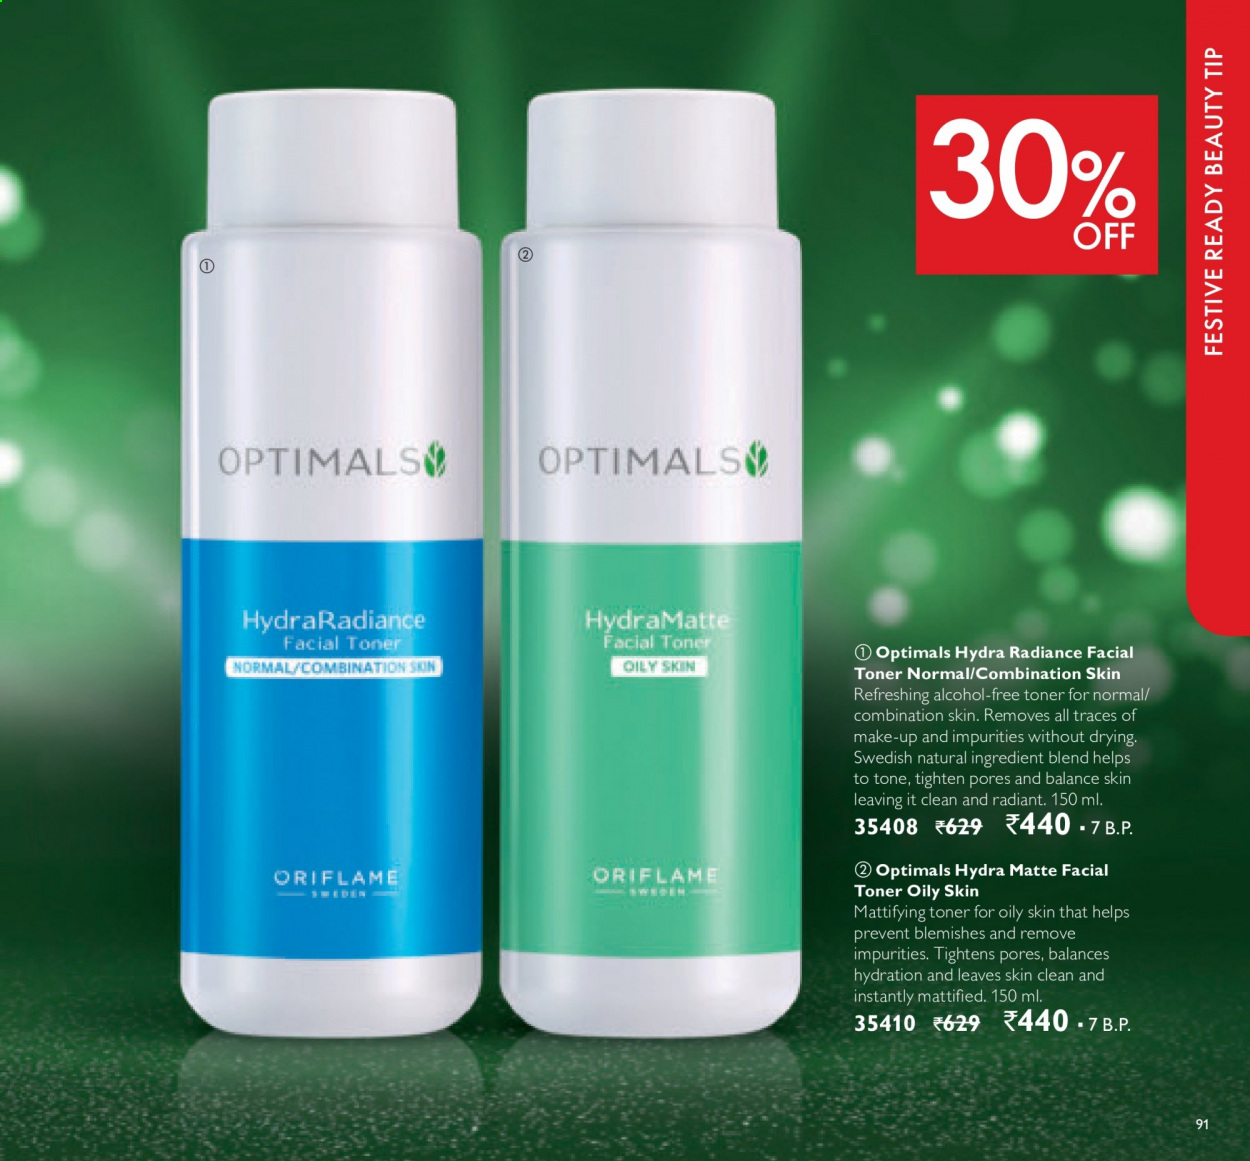 Oriflame offer  - 01.09.2021 - 30.09.2021. Page 91.